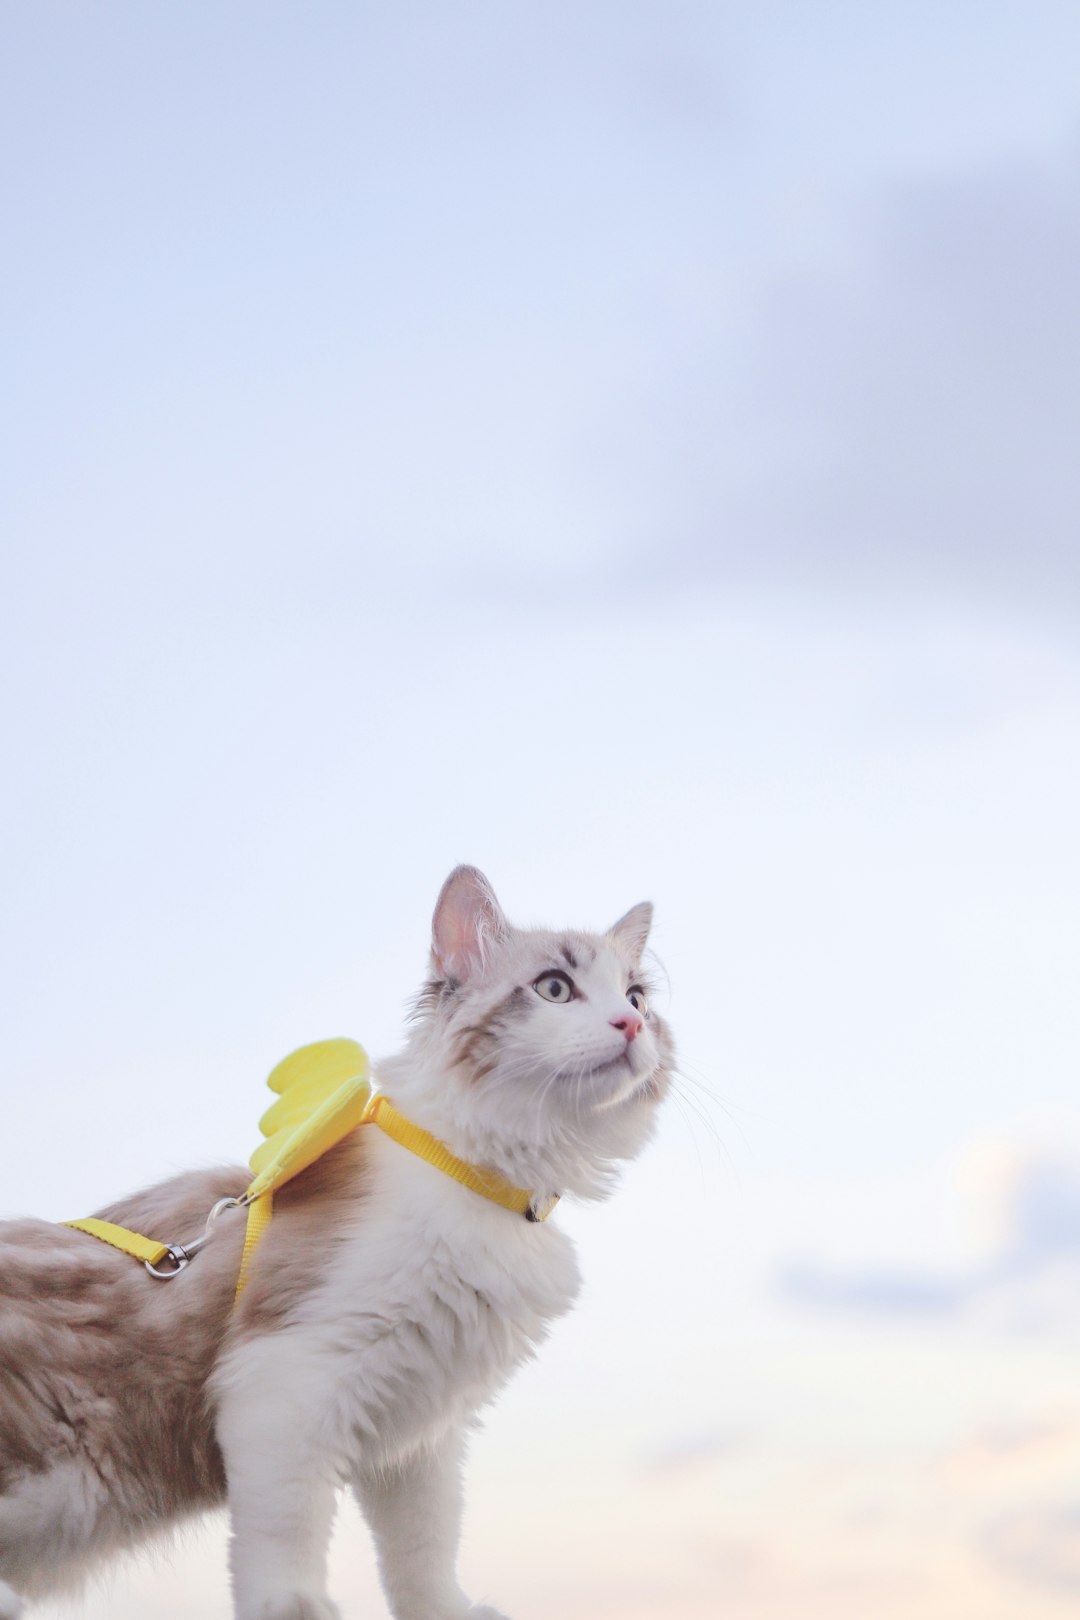 white cat with yellow collar